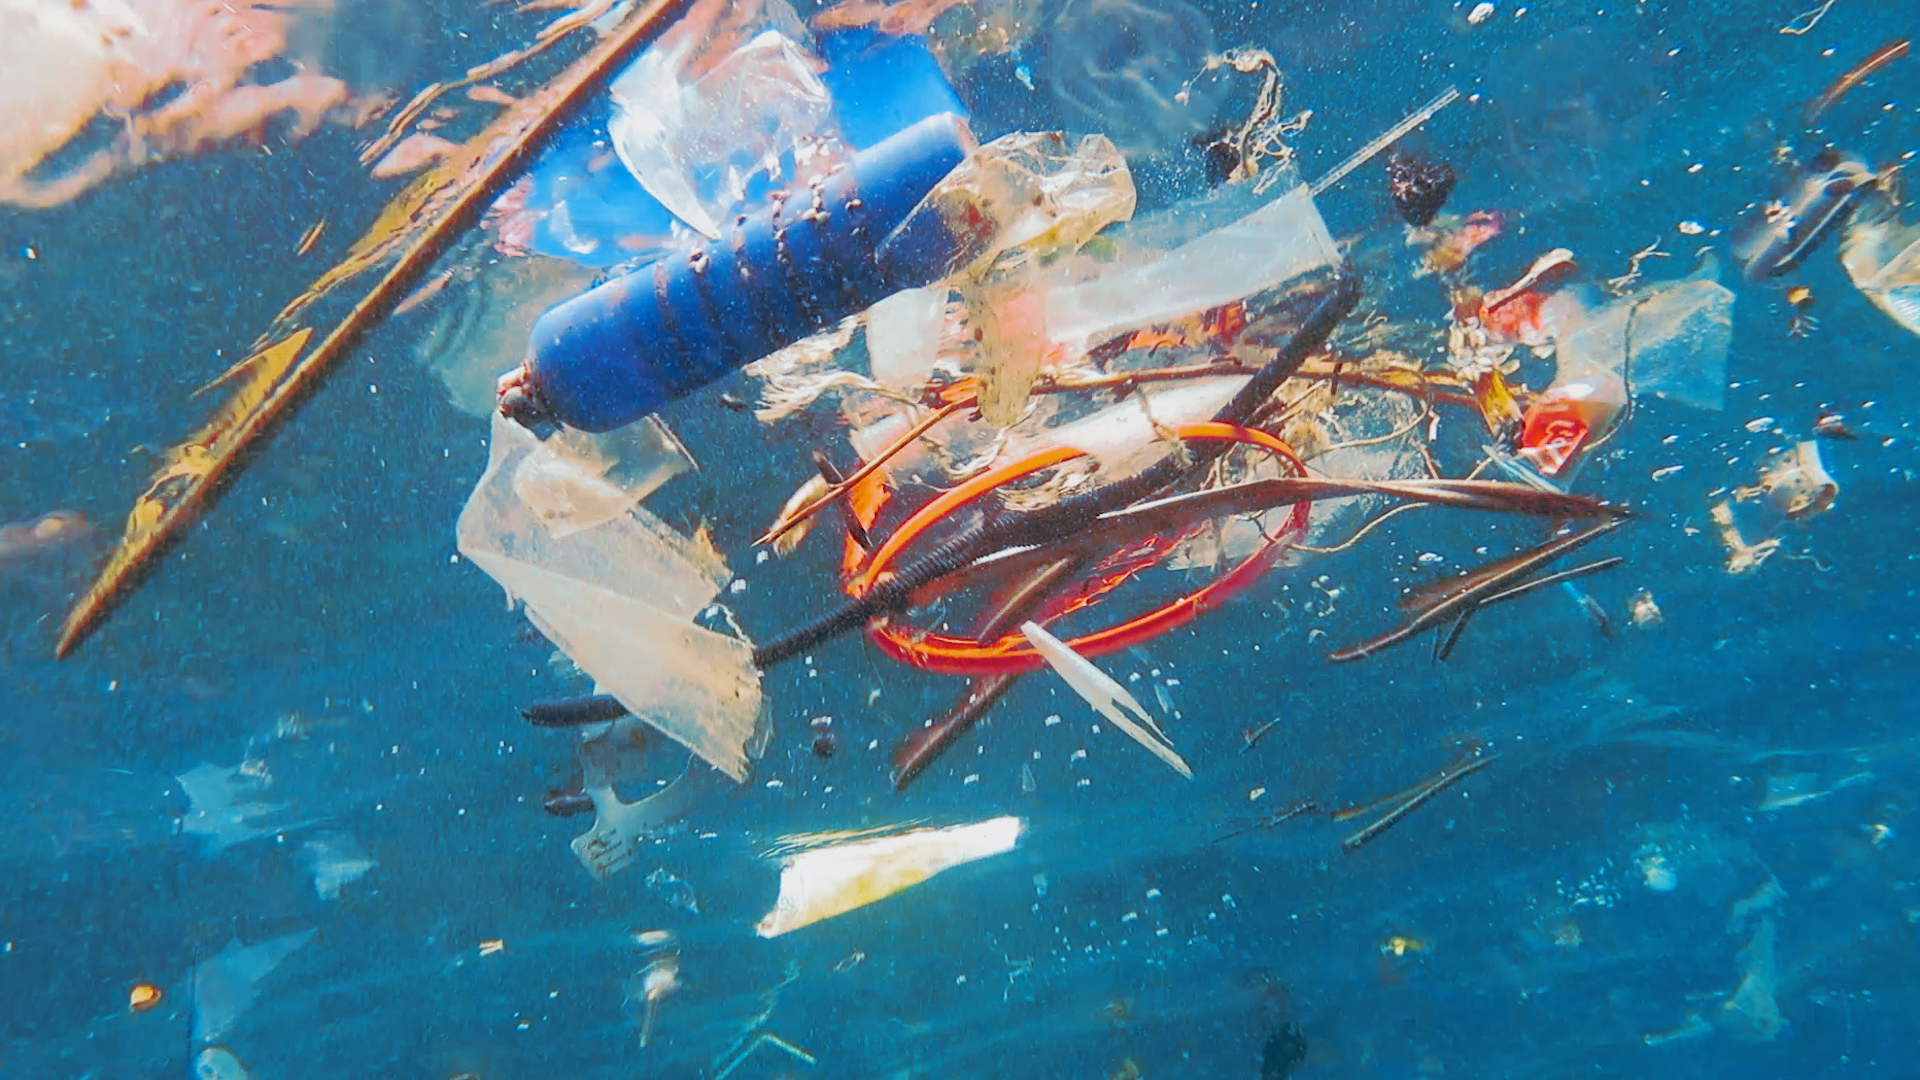 Scientists discovered a marine fungus, Parengydontium album, that breaks down plastic, offering hope in the battle against plastic pollution.